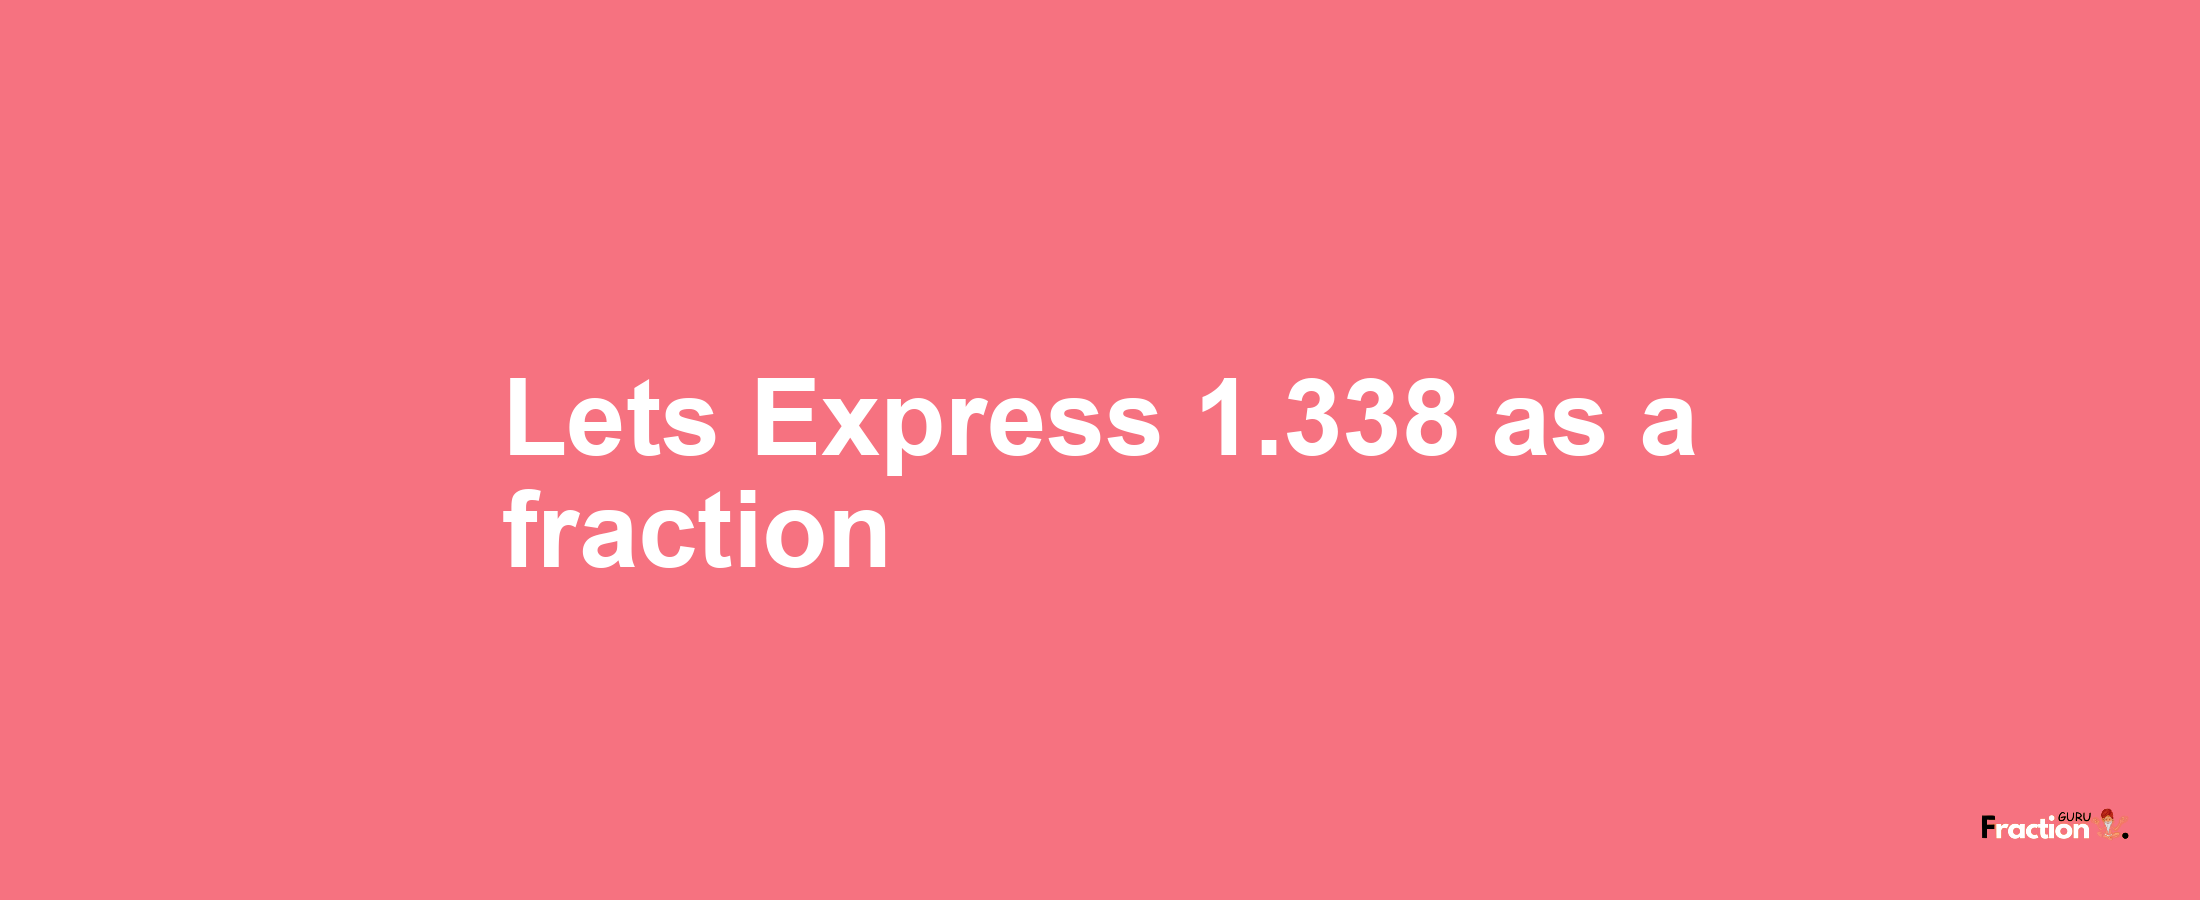 Lets Express 1.338 as afraction